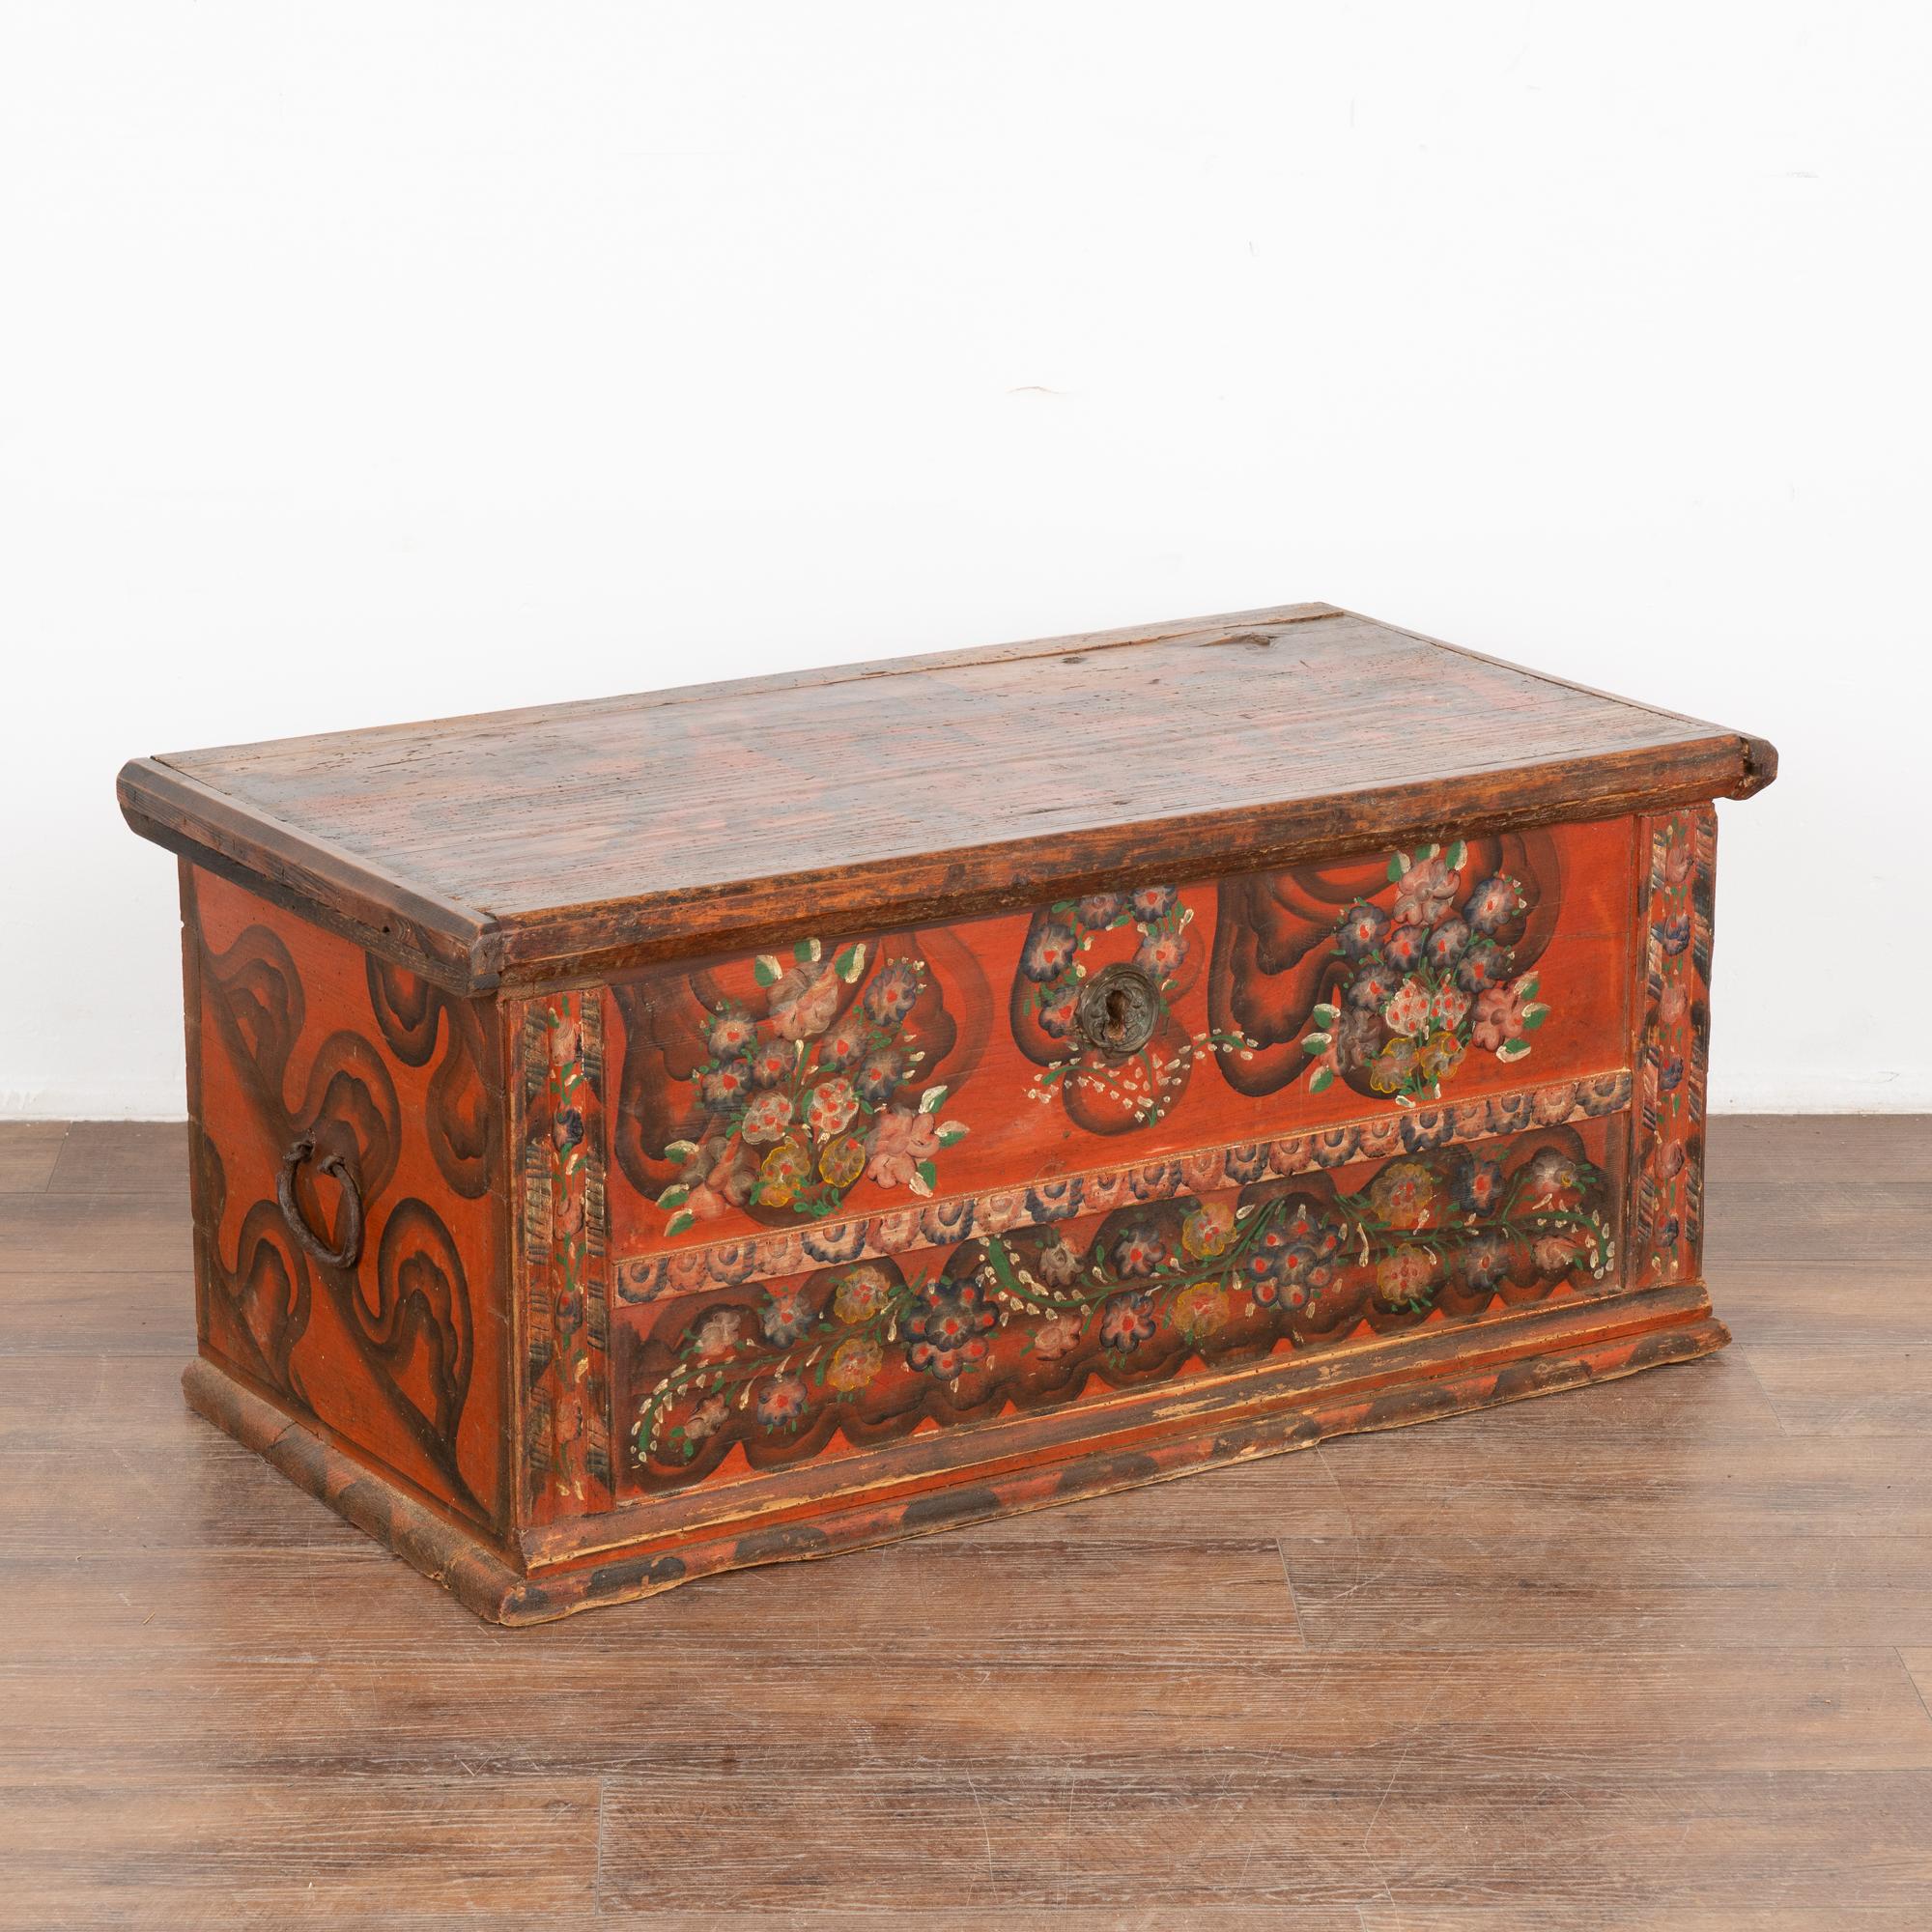 Original hand-painted folk art flat top pine trunk.
Original traditional floral motif painted finish in red/burnt orange, brown/black, yellow and green.
Restored and waxed, in solid condition ready to use. Original hand-wrought iron hinges and side